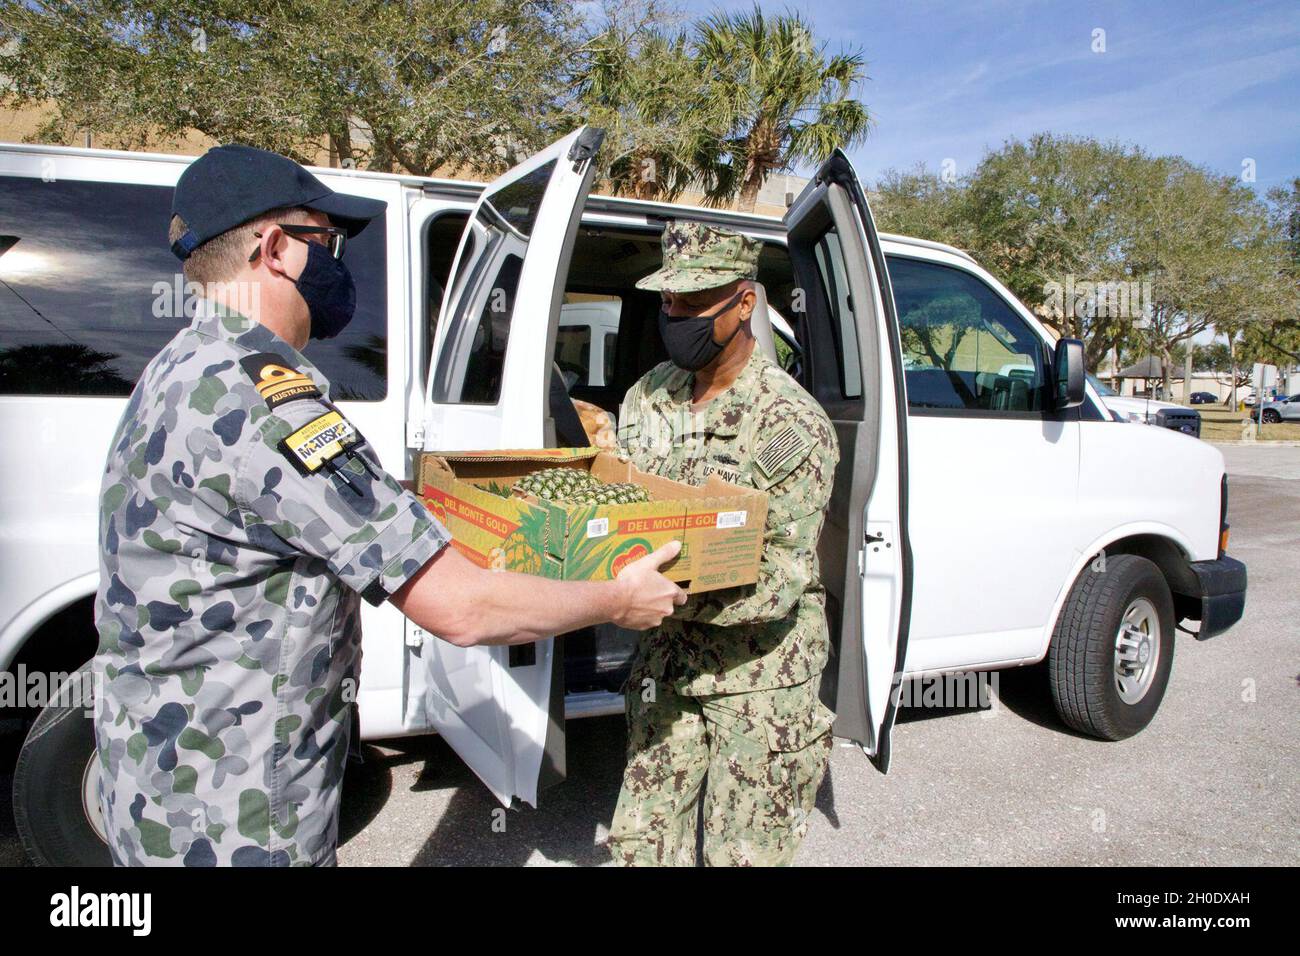 Lt. Matthew McGuire (RAN) and LS1 (EXW) Darrell Moore assist members of a visiting submarine crew with the transfer of provisions at the NAVSUP FLC Jacksonville Logistics Support Center. The visiting submarine is participating in the Diesel-Electric Submarine Initiative (DESI) at Naval Station Mayport. Stock Photo